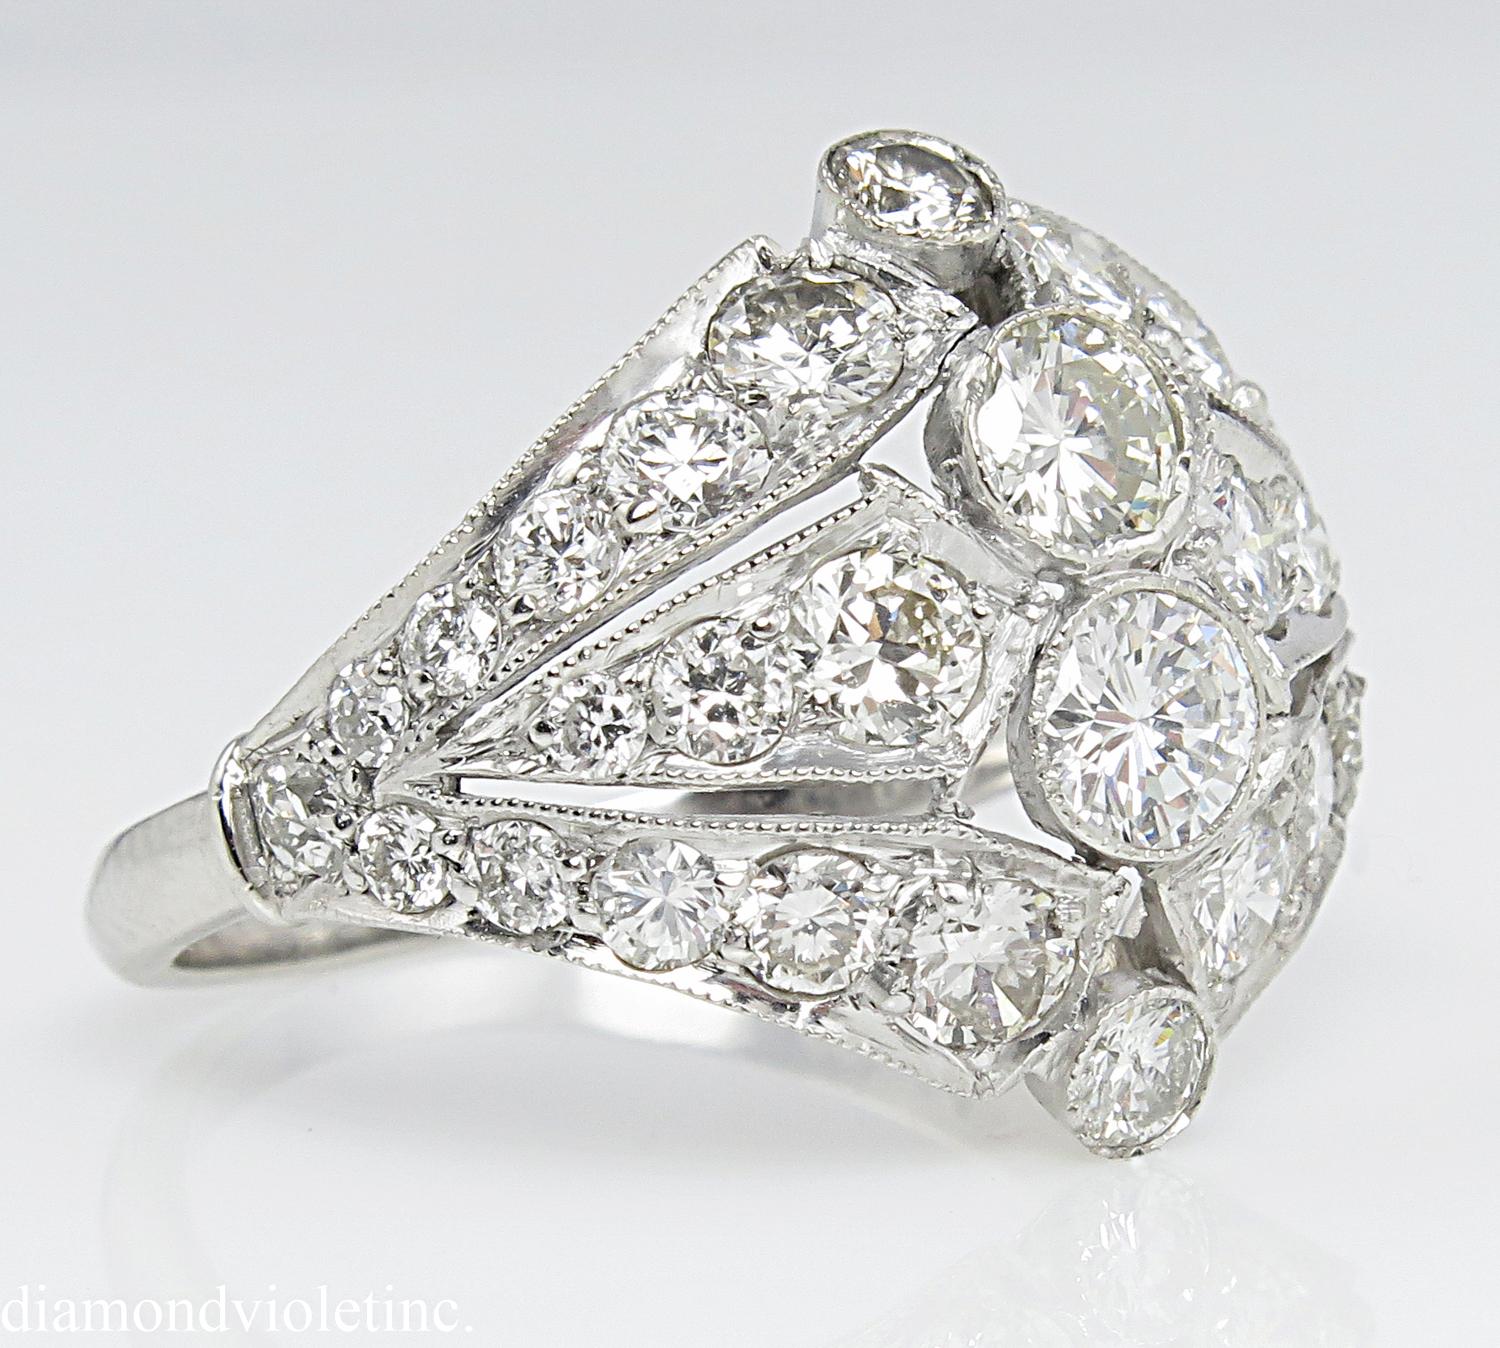 An Amazing Vintage Platinum (stamped) Wedding Anniversary or a Right Hand ring. A one of a kind setting features 32 Round Brilliant Diamonds. Estimated total weight is 2.89ct. EGL USA Certified as H-I-J color, SI2-I1 clarity (eye CLEAR), very Bright